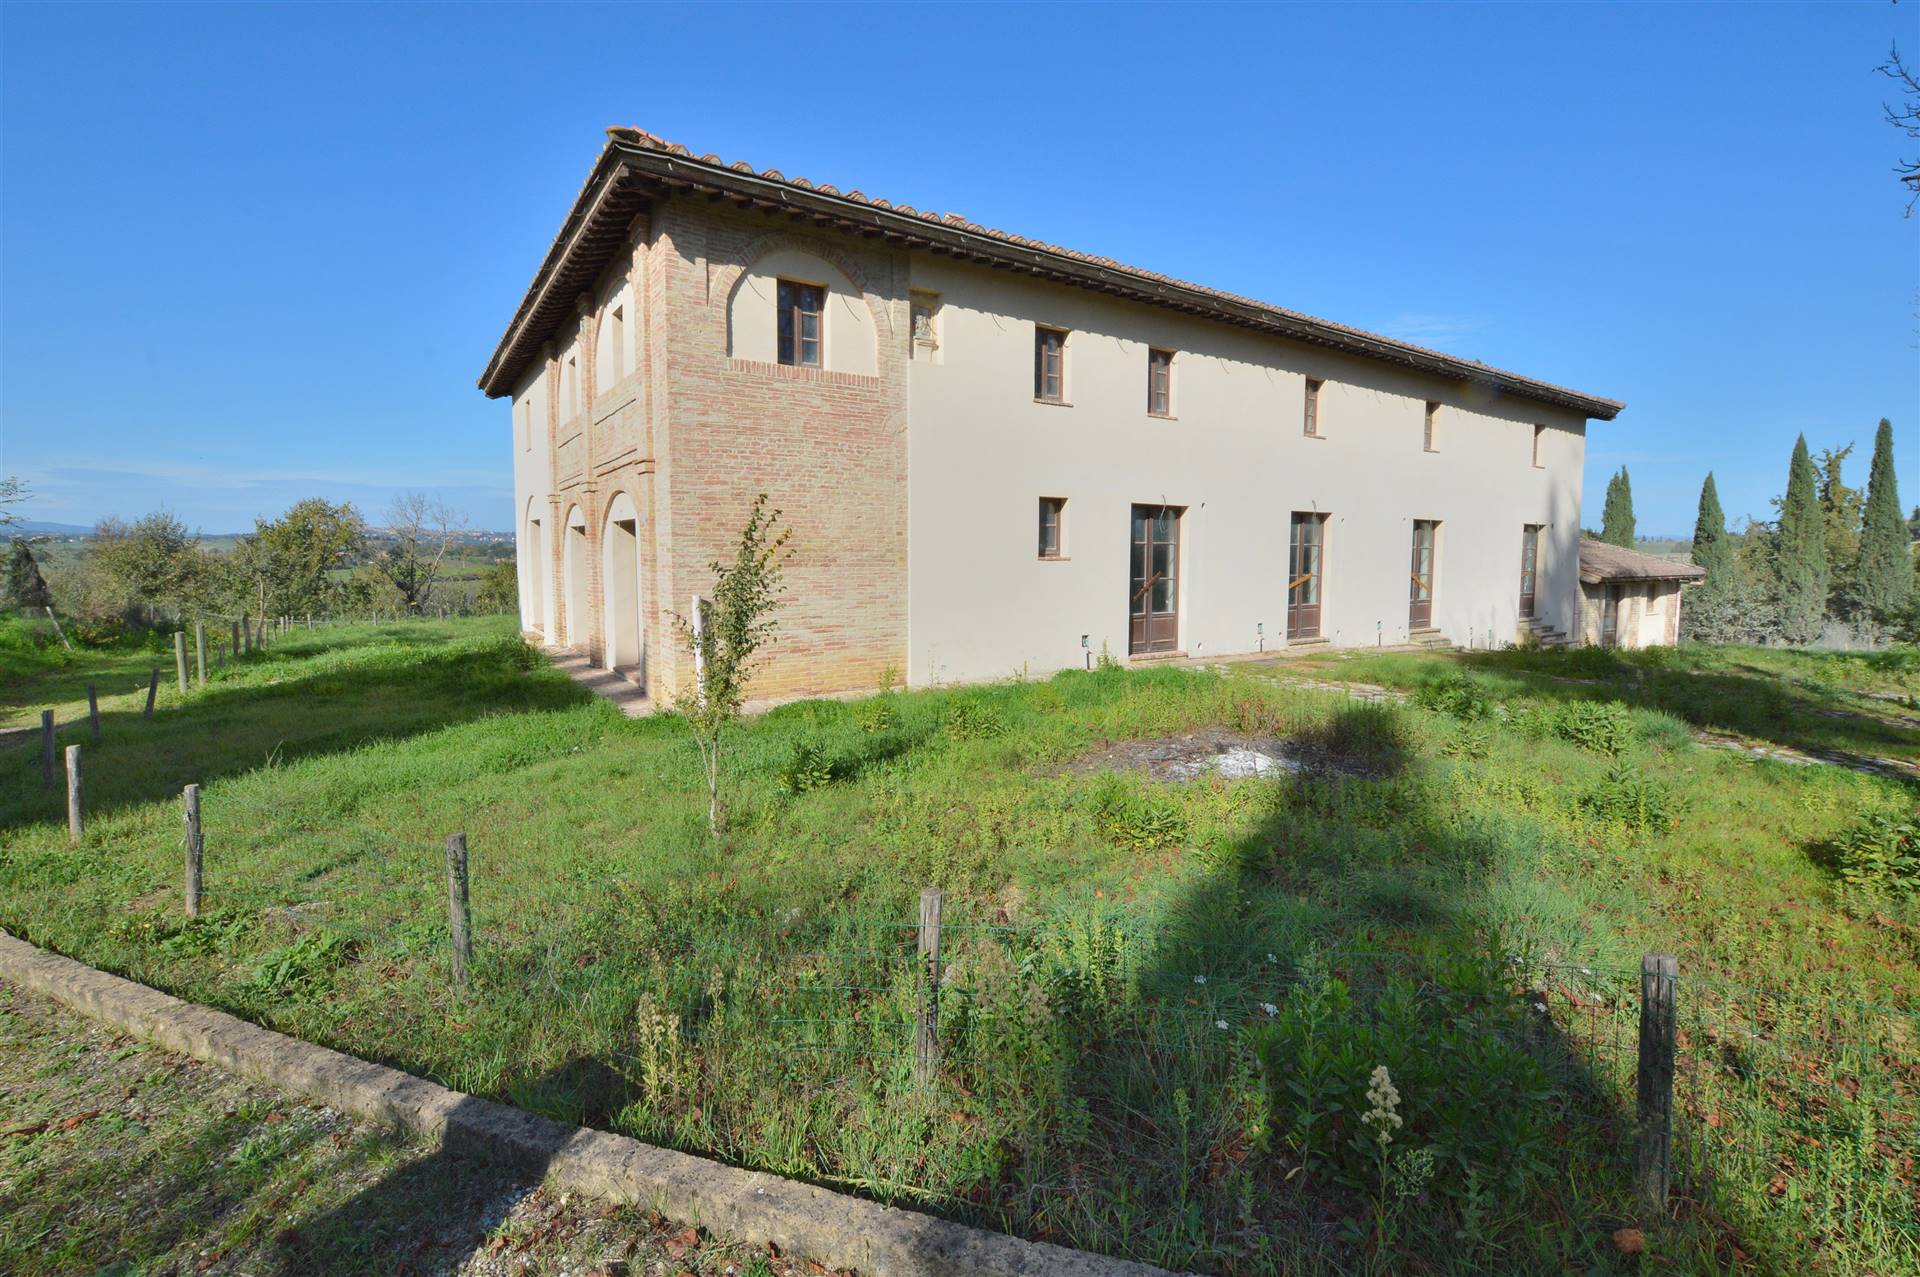 SALTEANO, SIENA, Apartment for sale of 55 Sq. mt., Restored, Heating Individual heating system, Energetic class: C, Epi: 60 kwh/m2 year, placed at Ground on 2, composed by: 3 Rooms, Kitchenette, , 1 